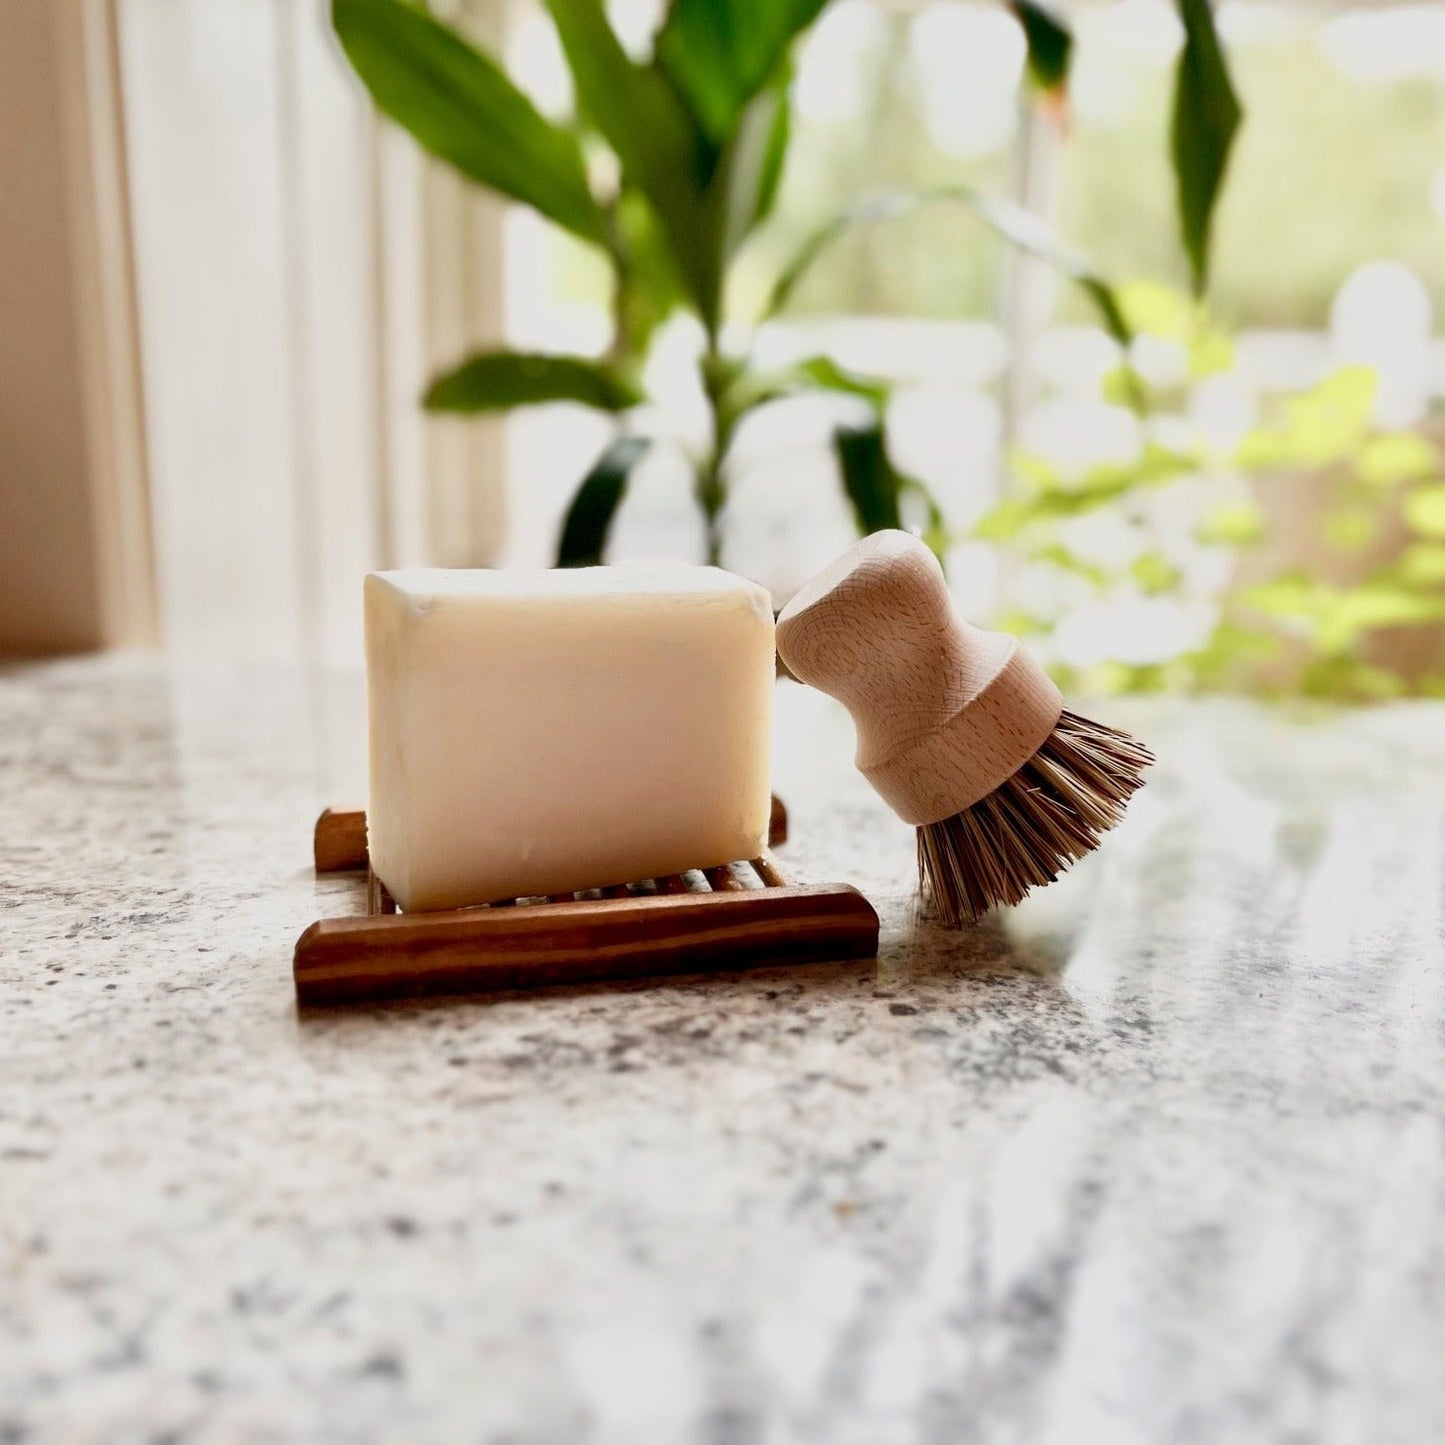 All Natural Soap | Unscented Dish Bar | Sustainable Home - 310 Soap Company